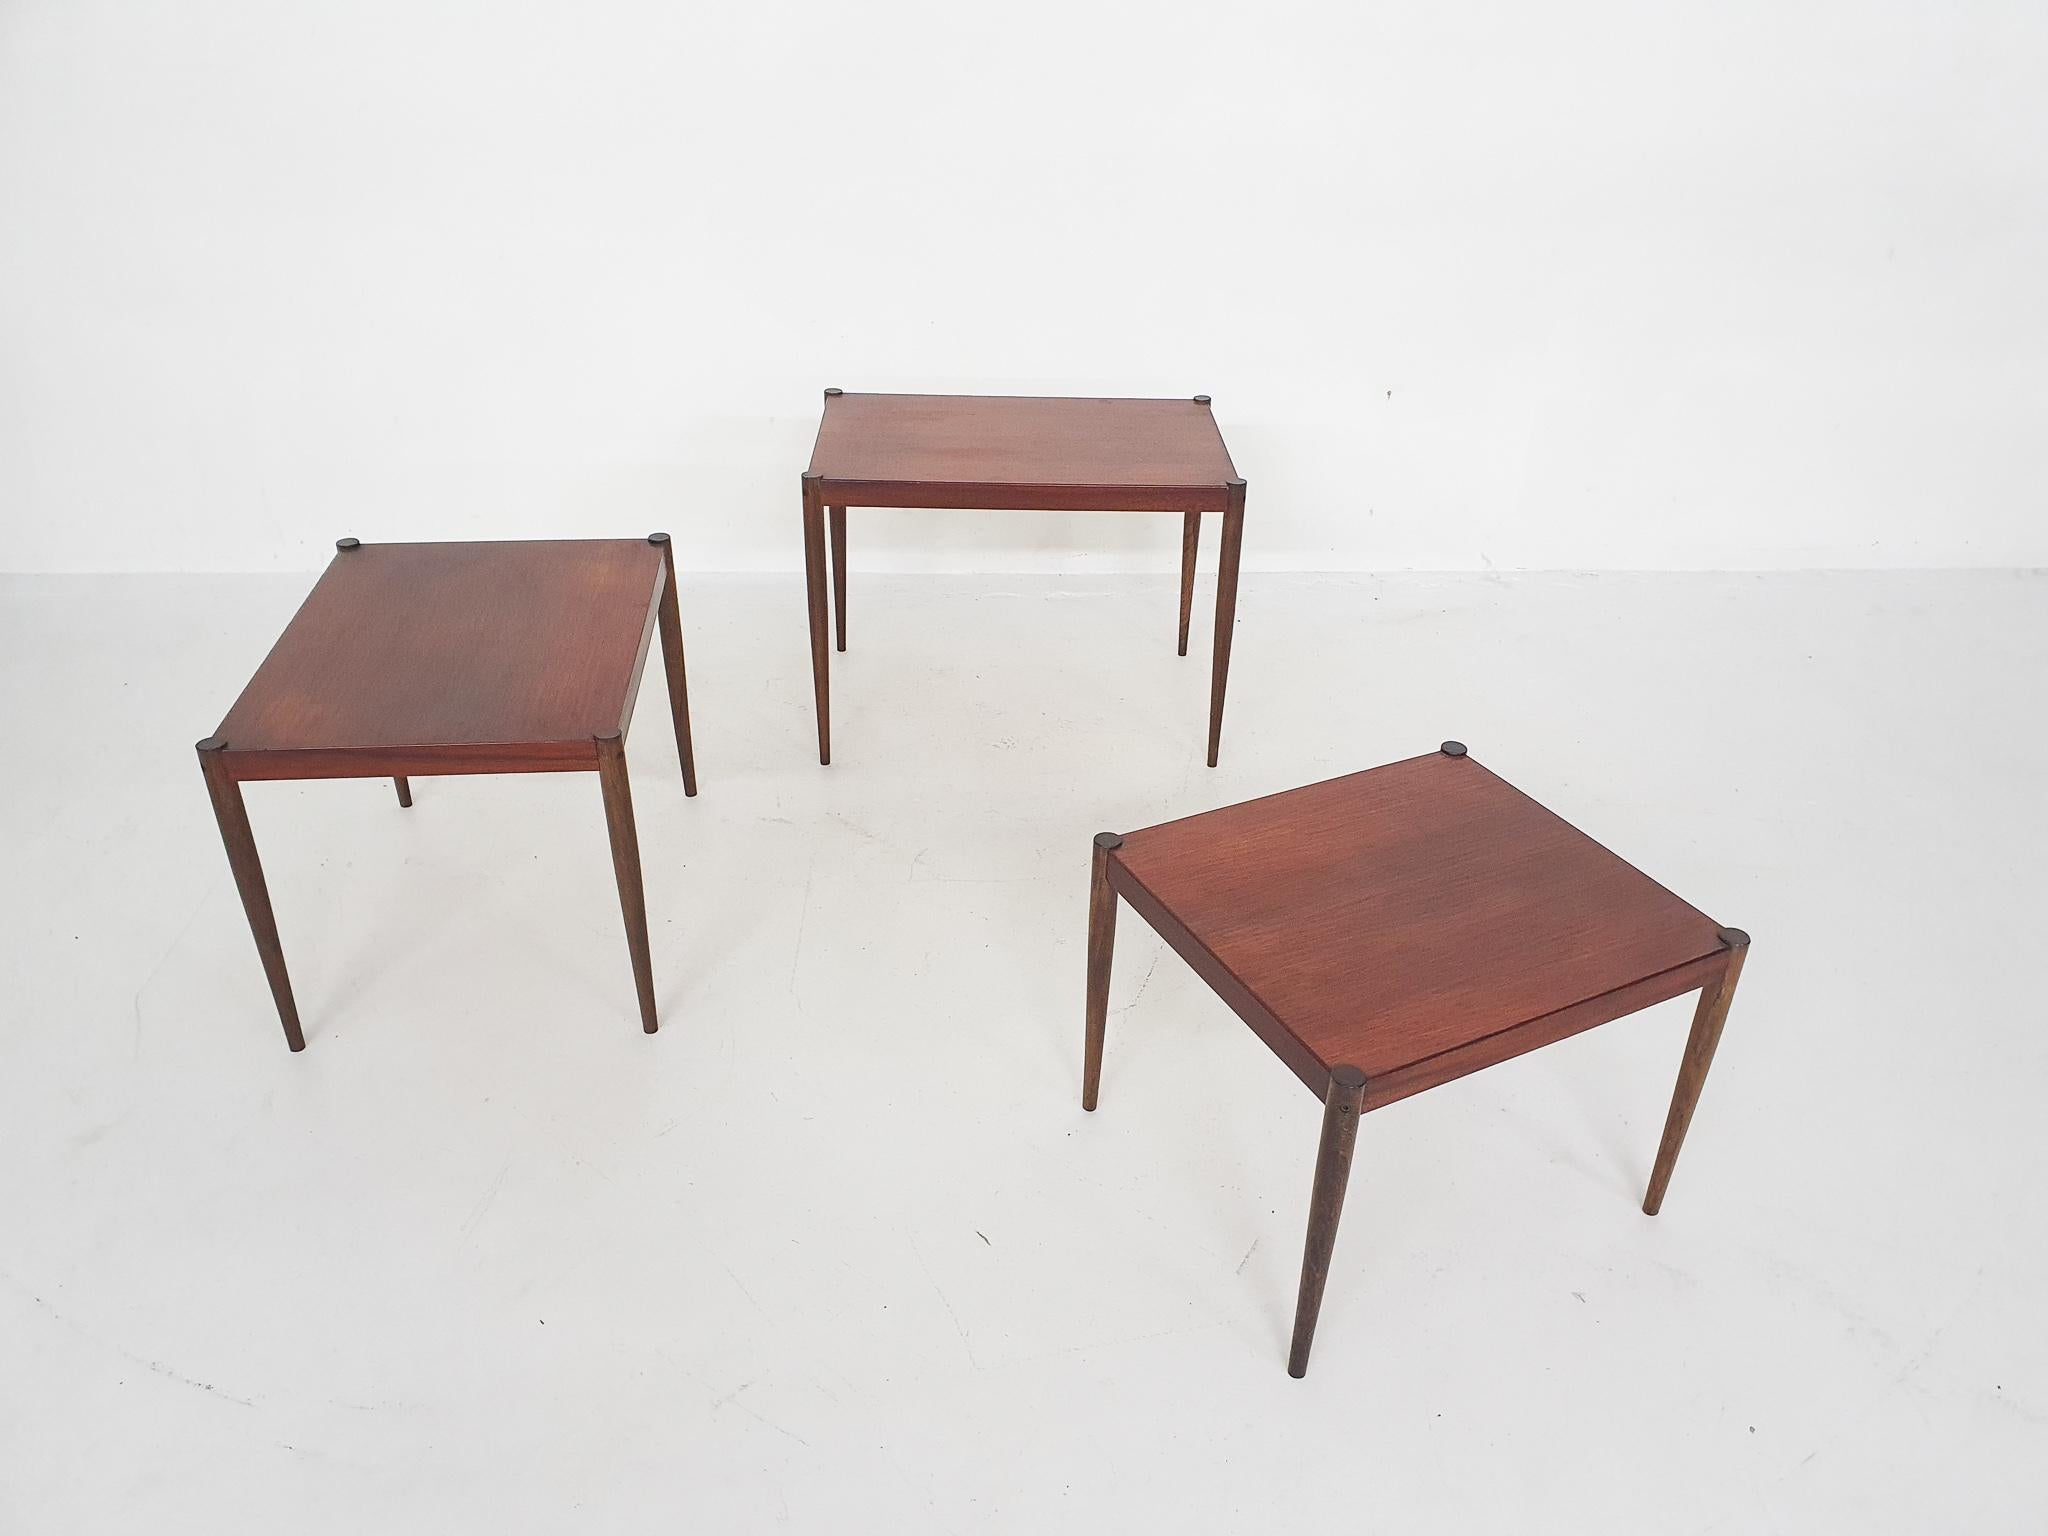 Scandinavian Modern Mid-Century Wooden Nesting Tables, The Netherlands, 1950's For Sale